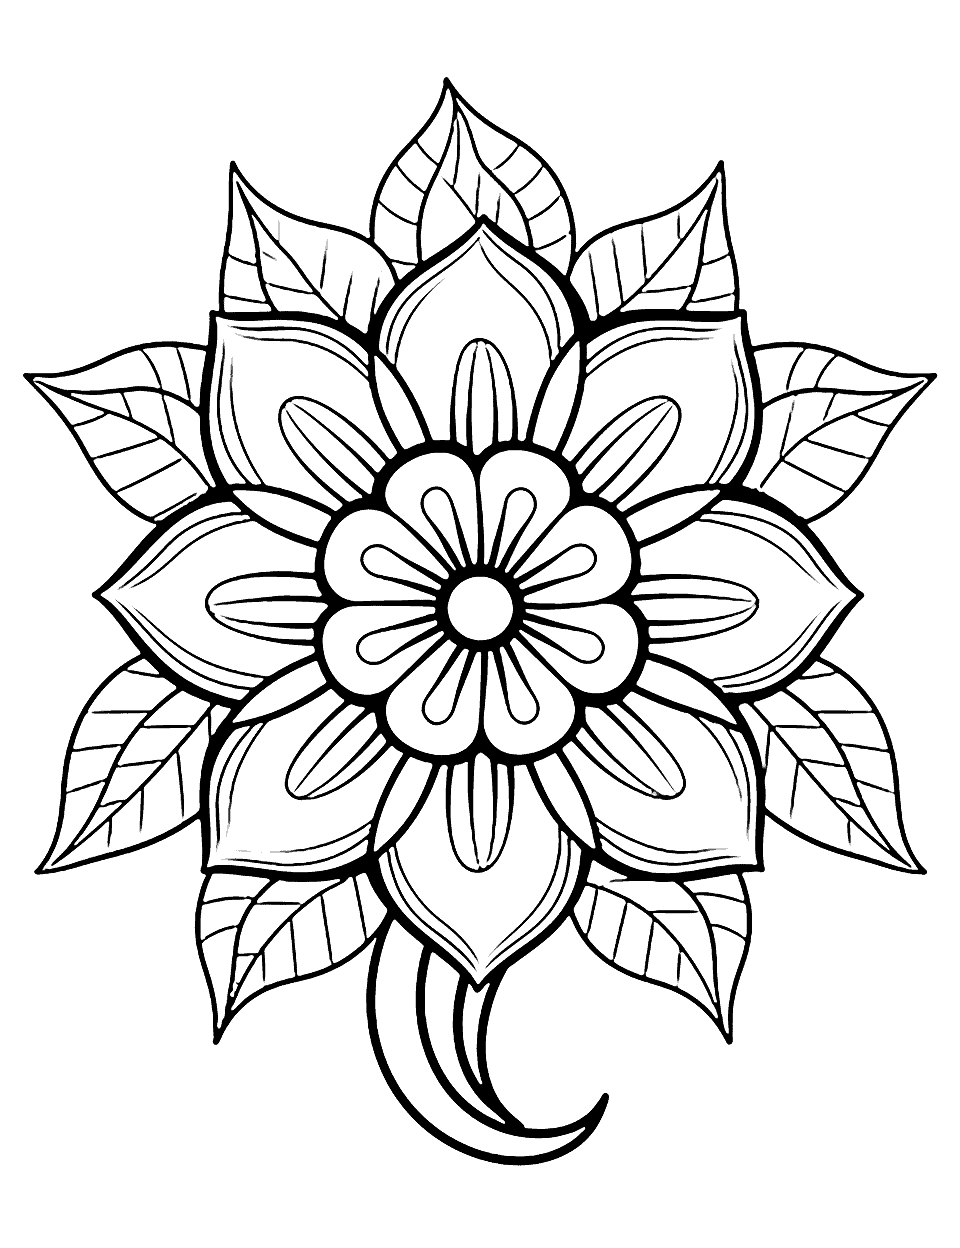 Advanced Floral Mandala Flower Coloring Page - A complex mandala filled with floral patterns.